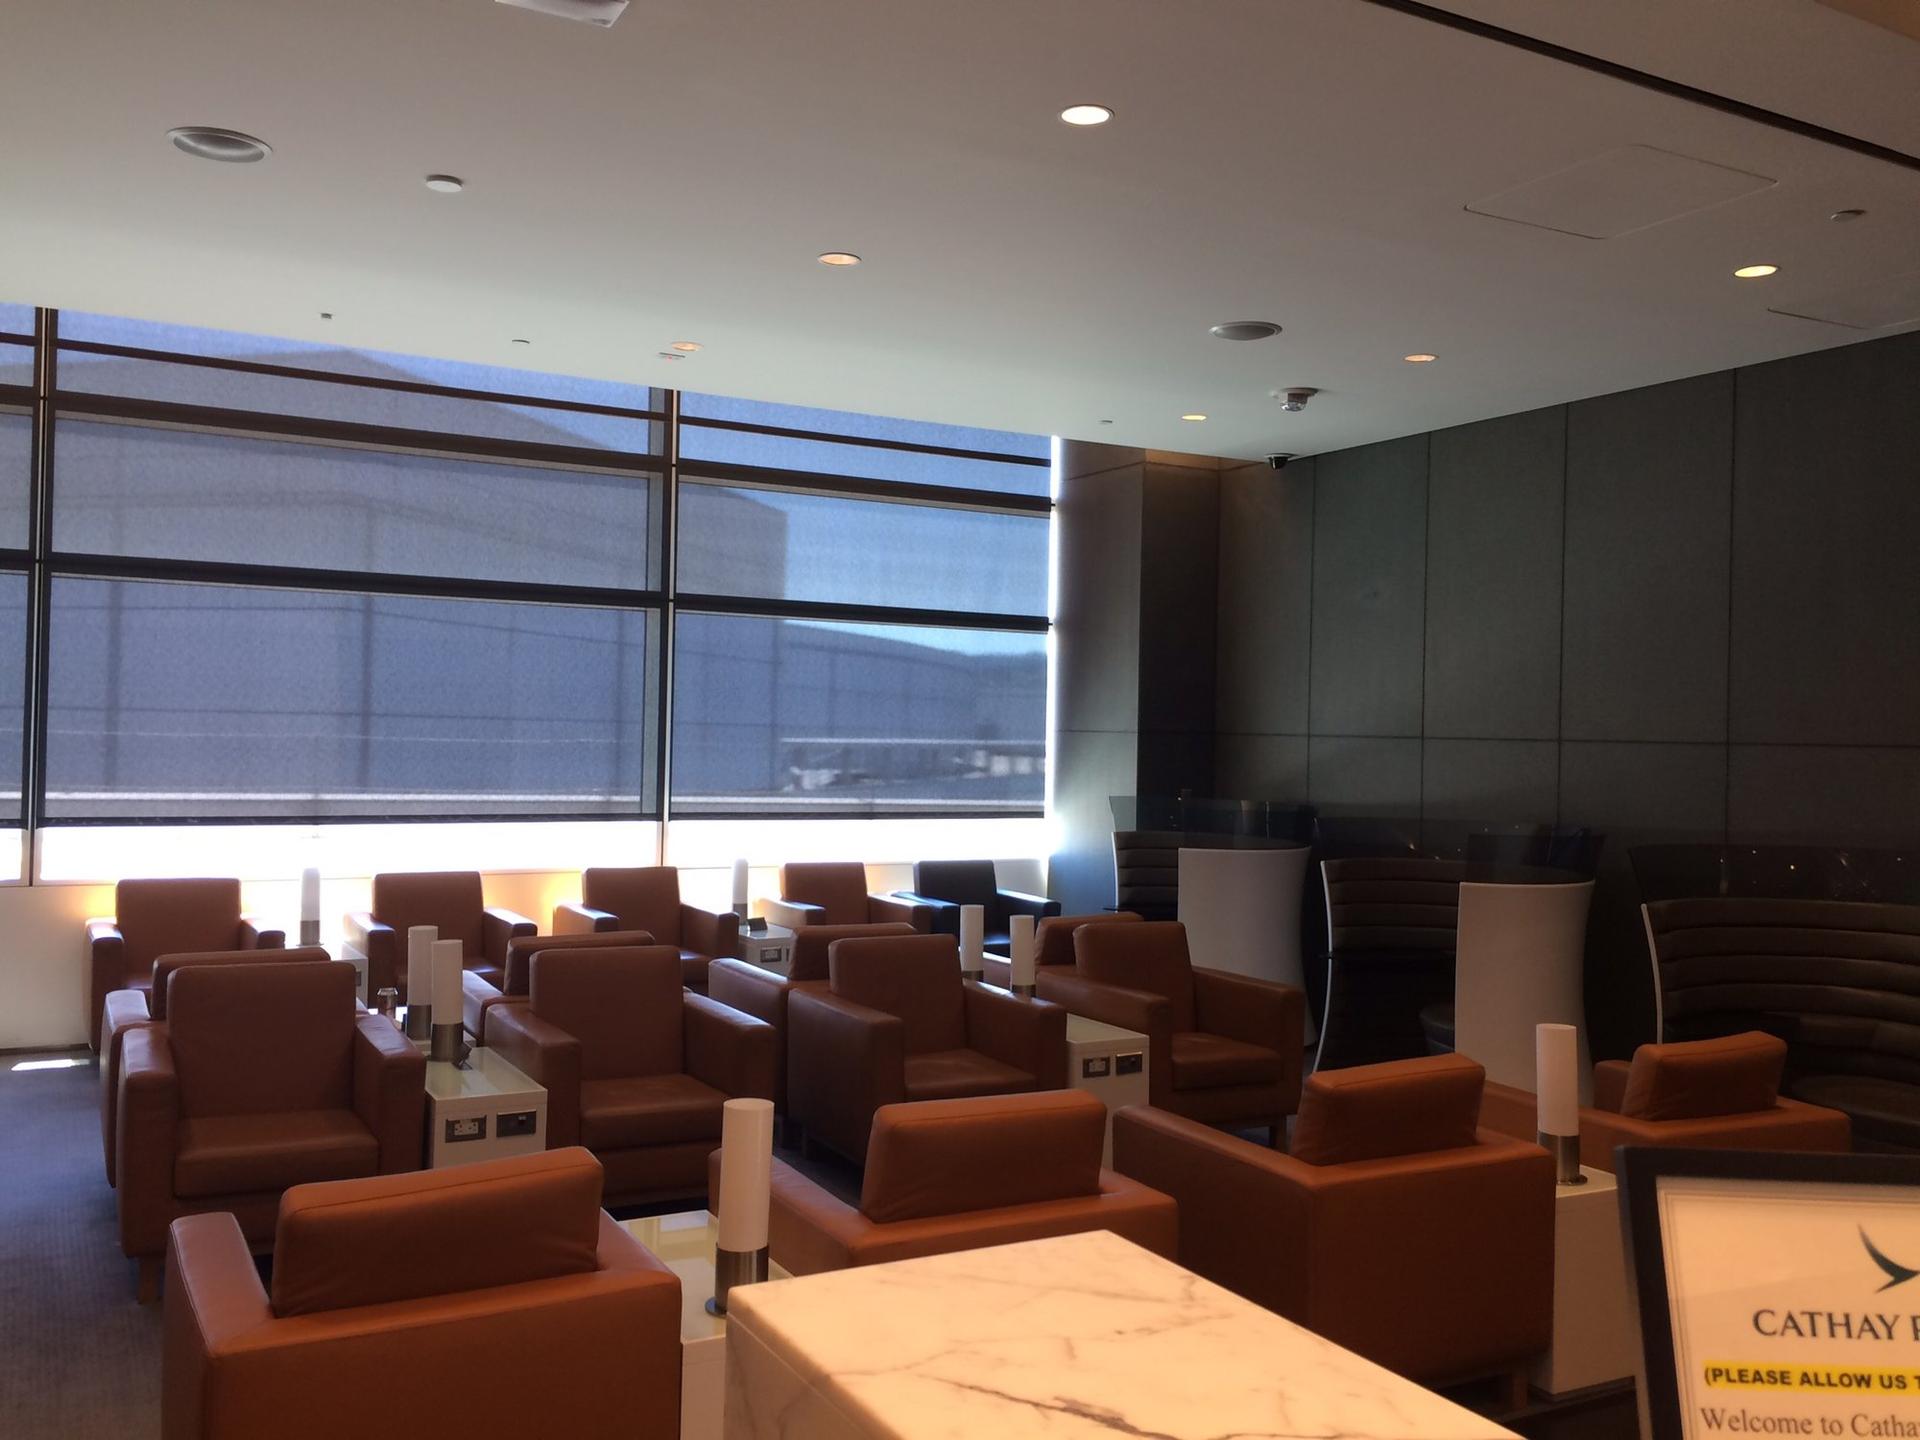 Cathay Pacific First and Business Class Lounge image 48 of 74